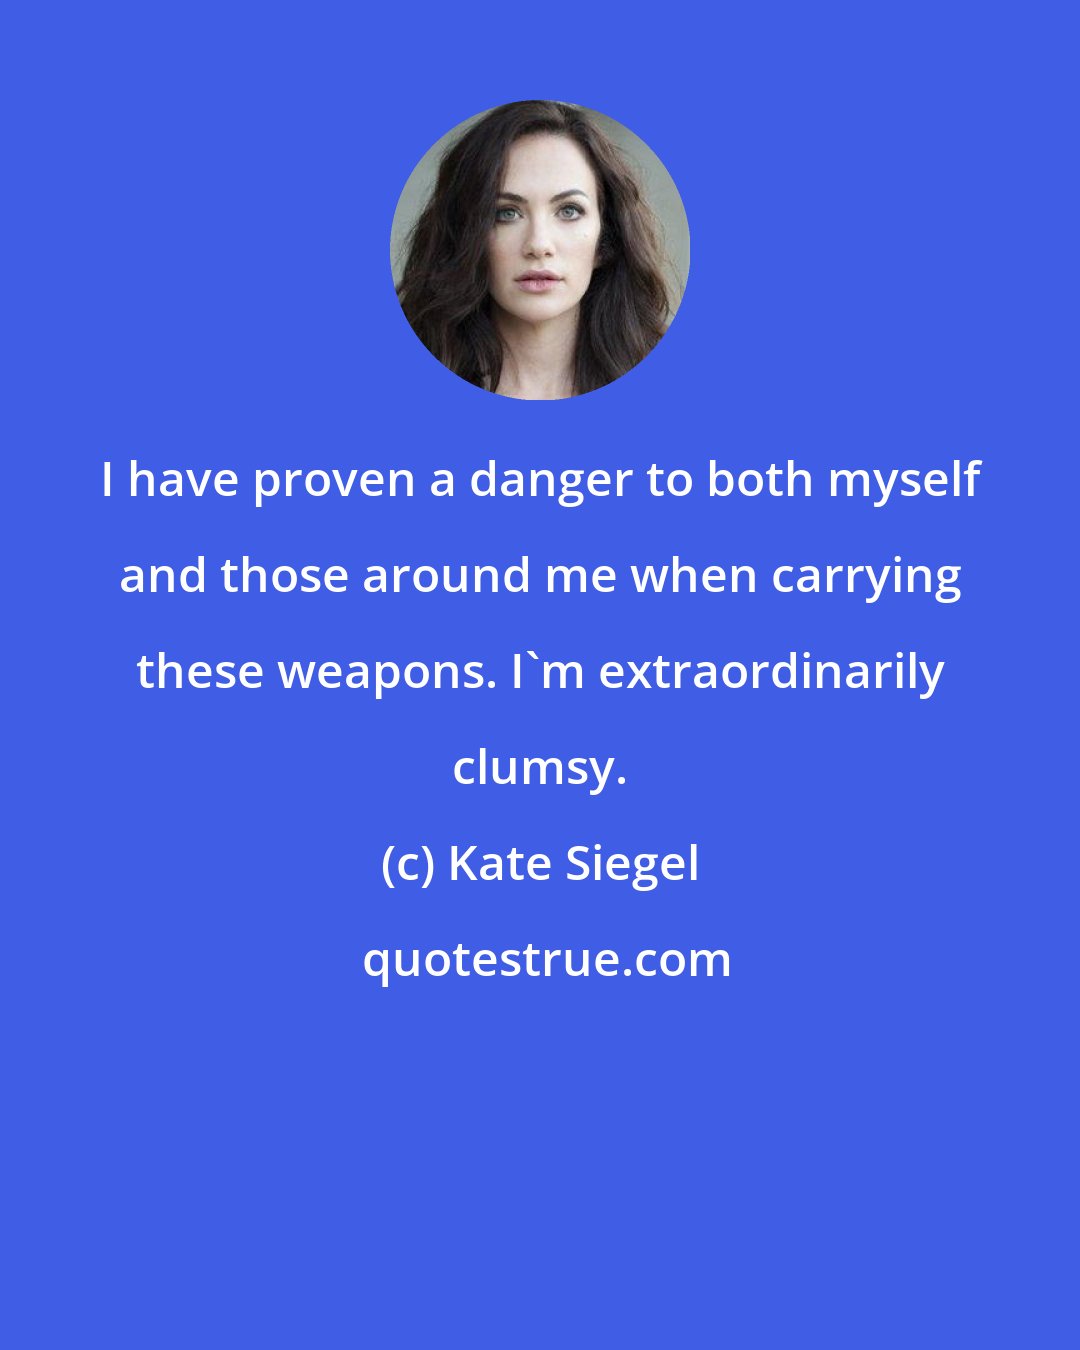 Kate Siegel: I have proven a danger to both myself and those around me when carrying these weapons. I'm extraordinarily clumsy.